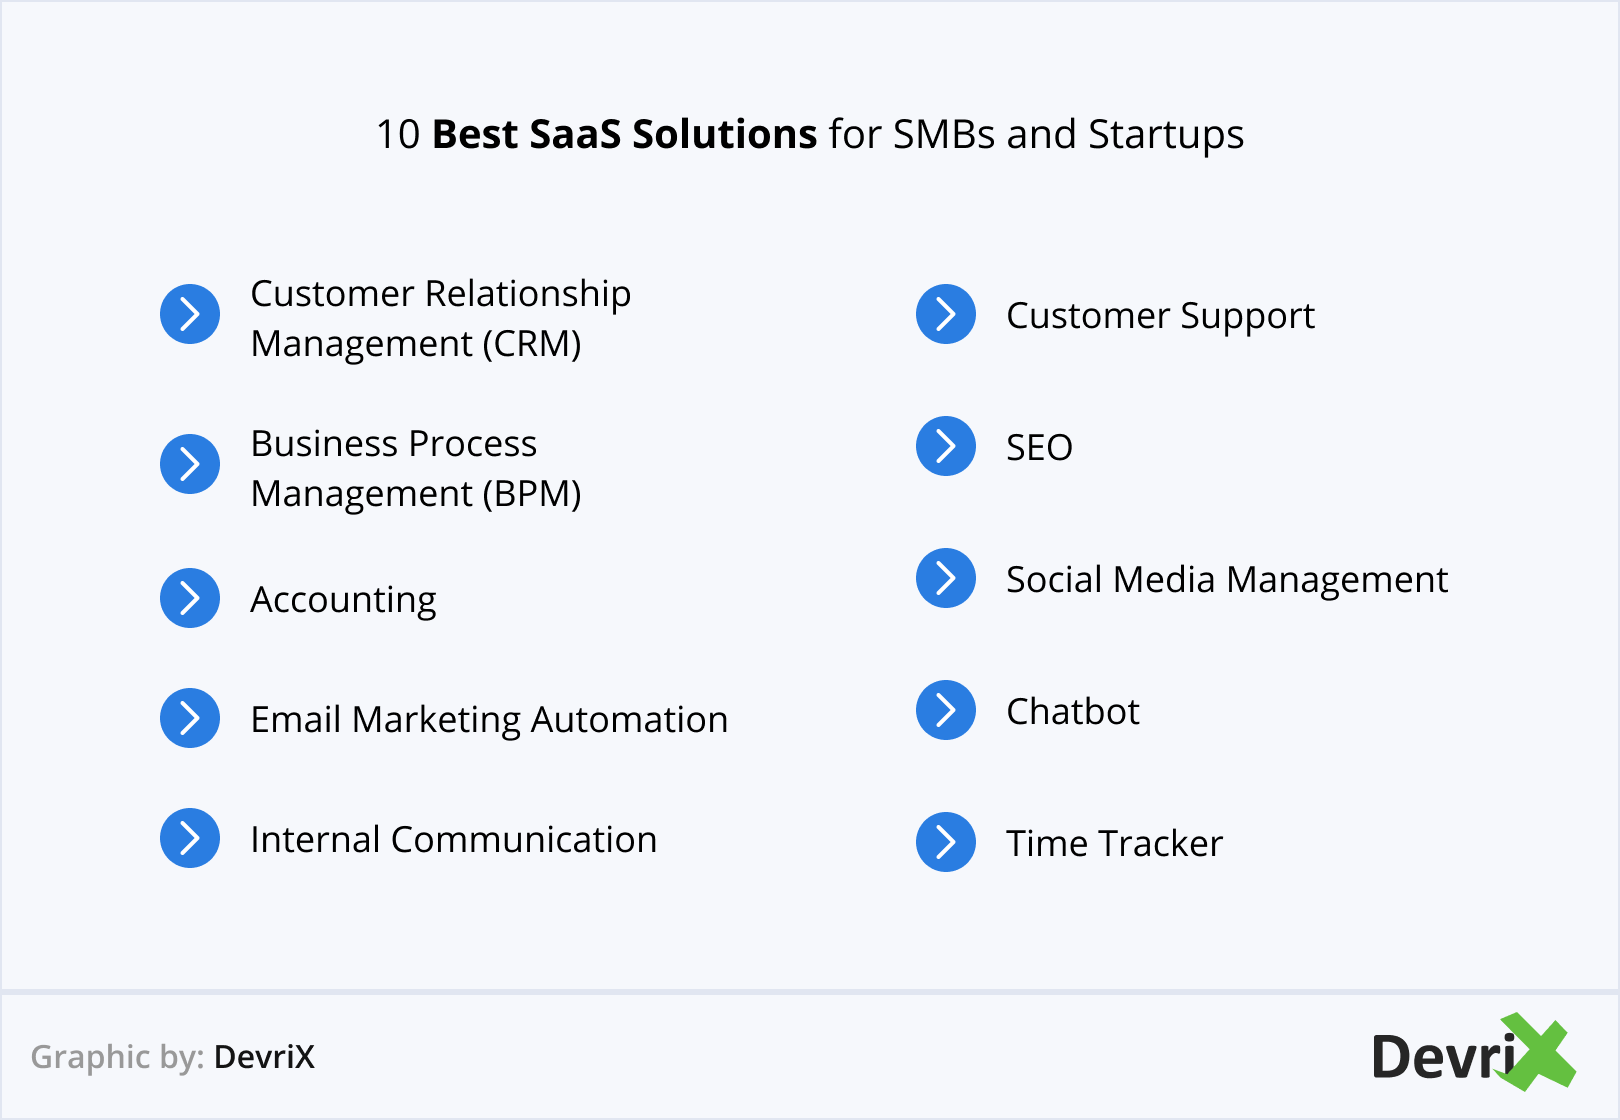 10 Best SaaS Solutions for SMBs and Startups